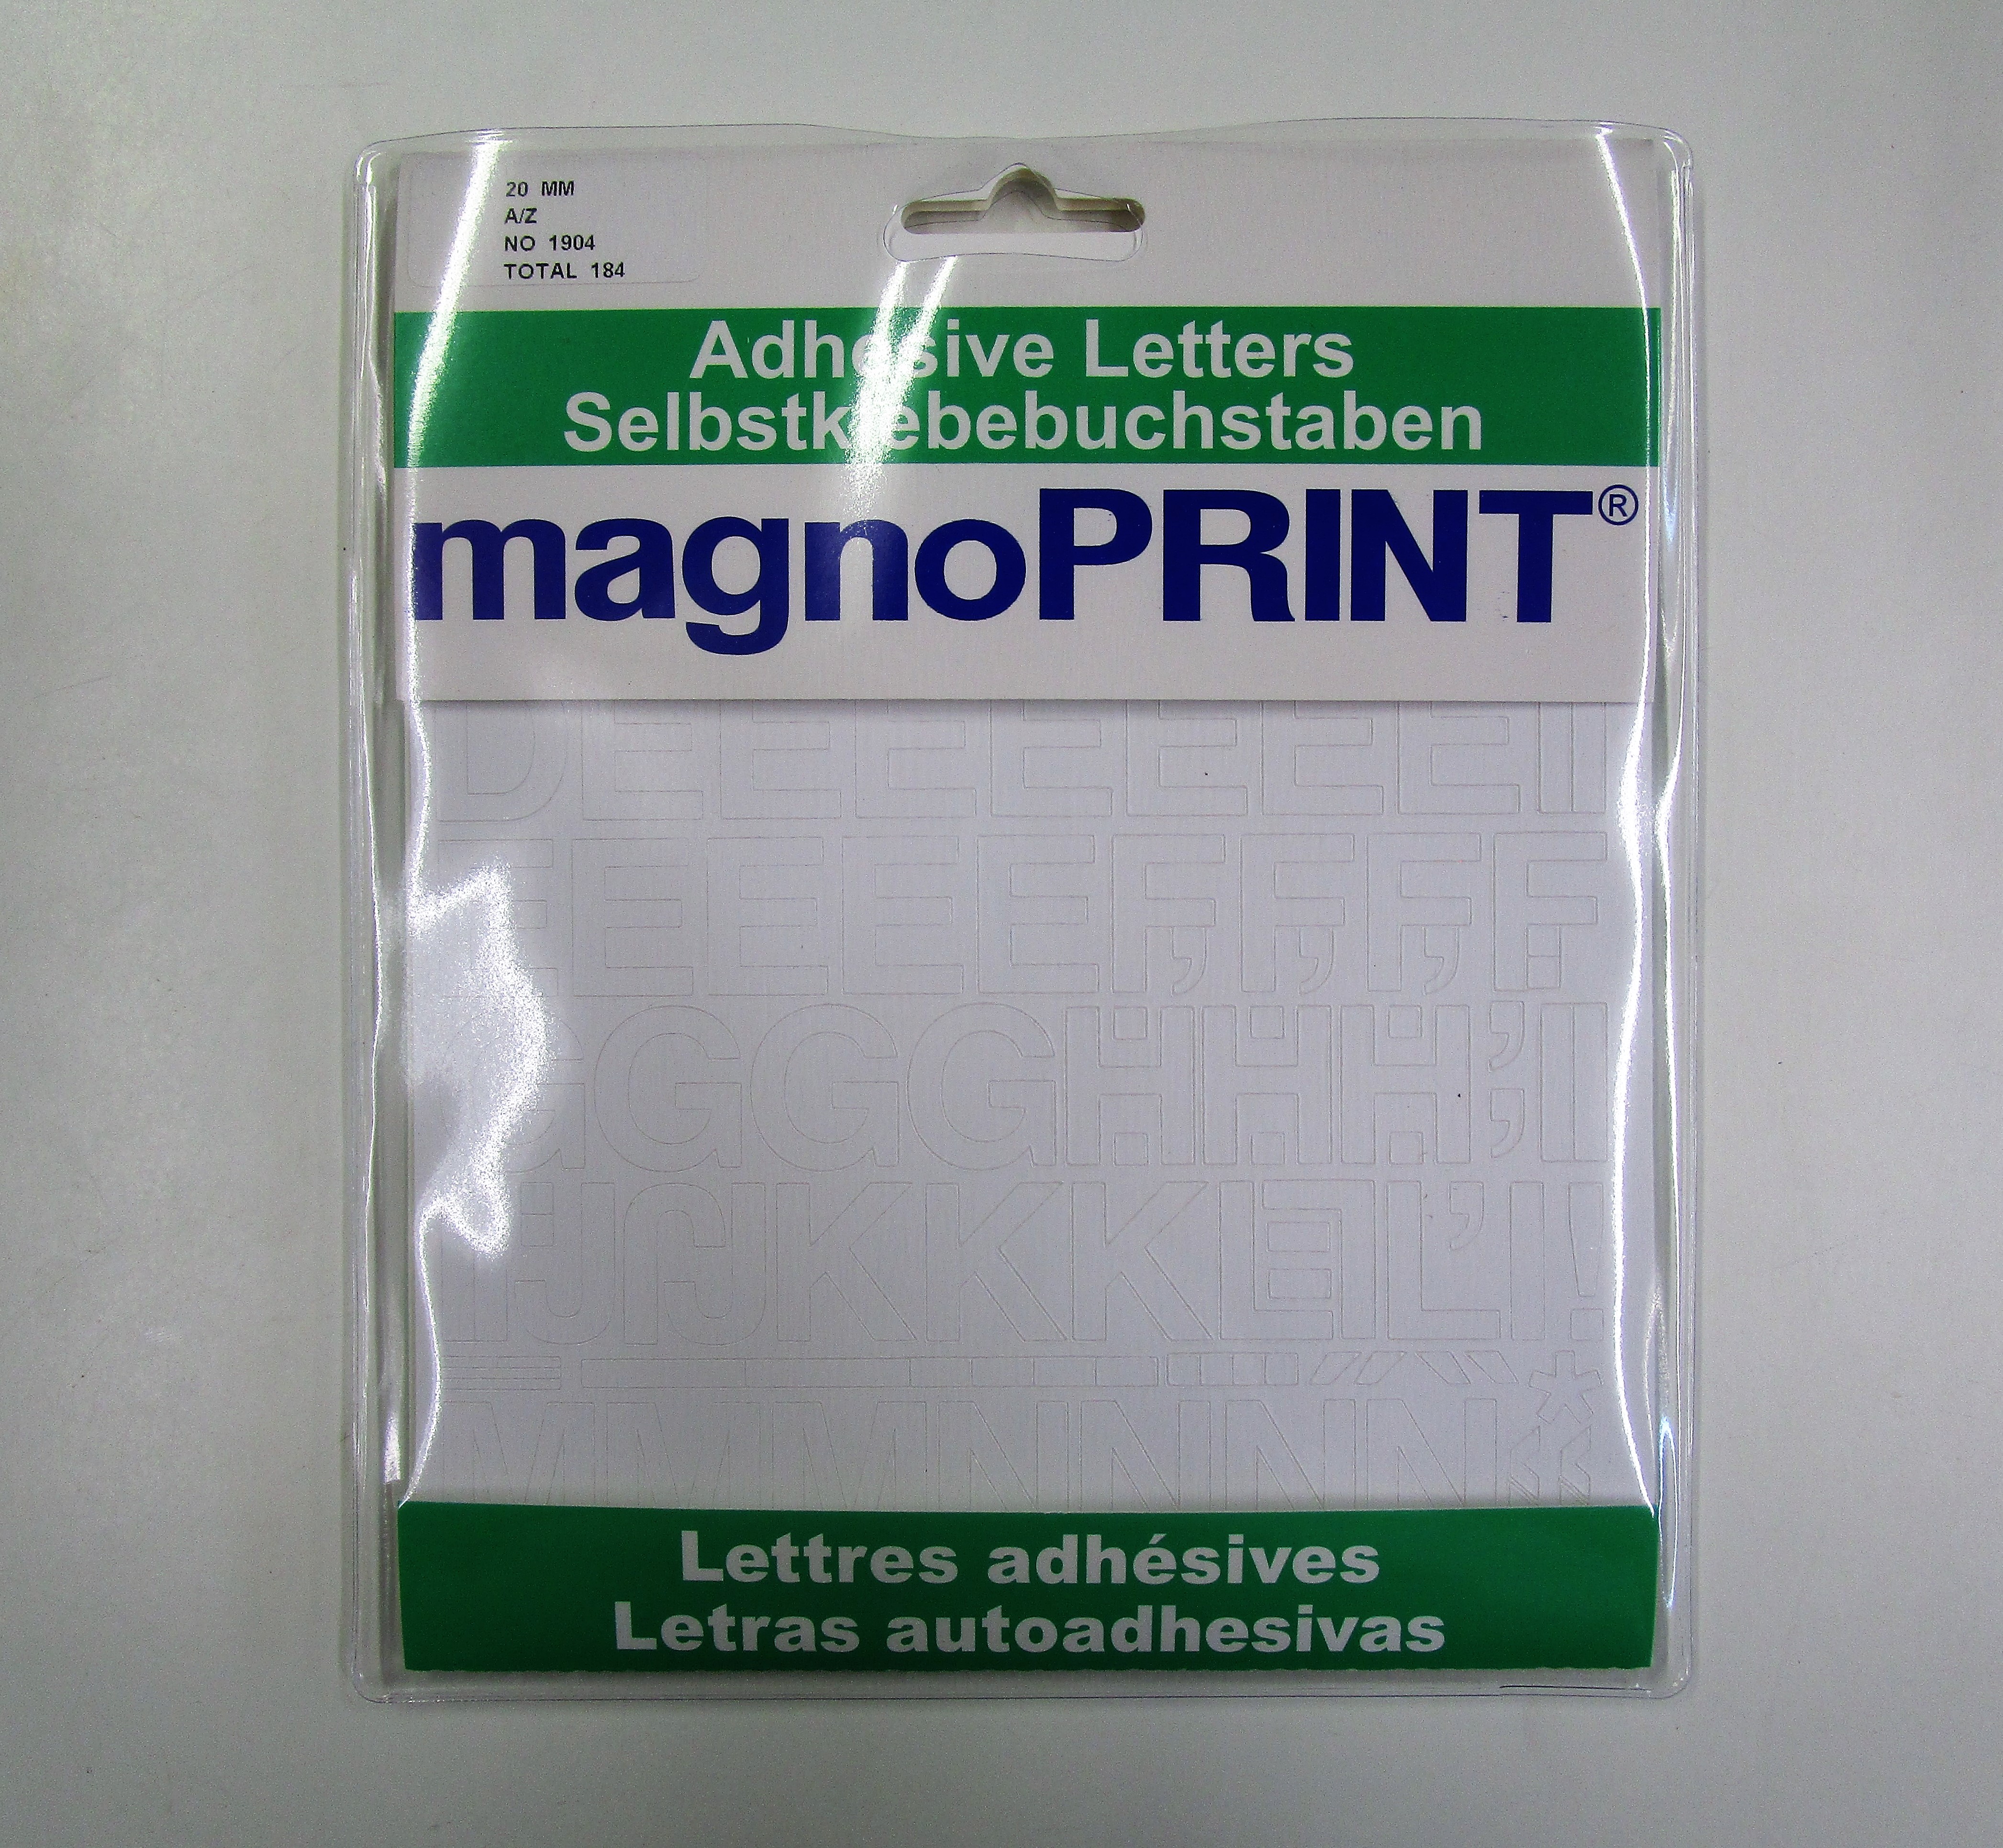 Magno Print 20 mm A-Z weiss<br>